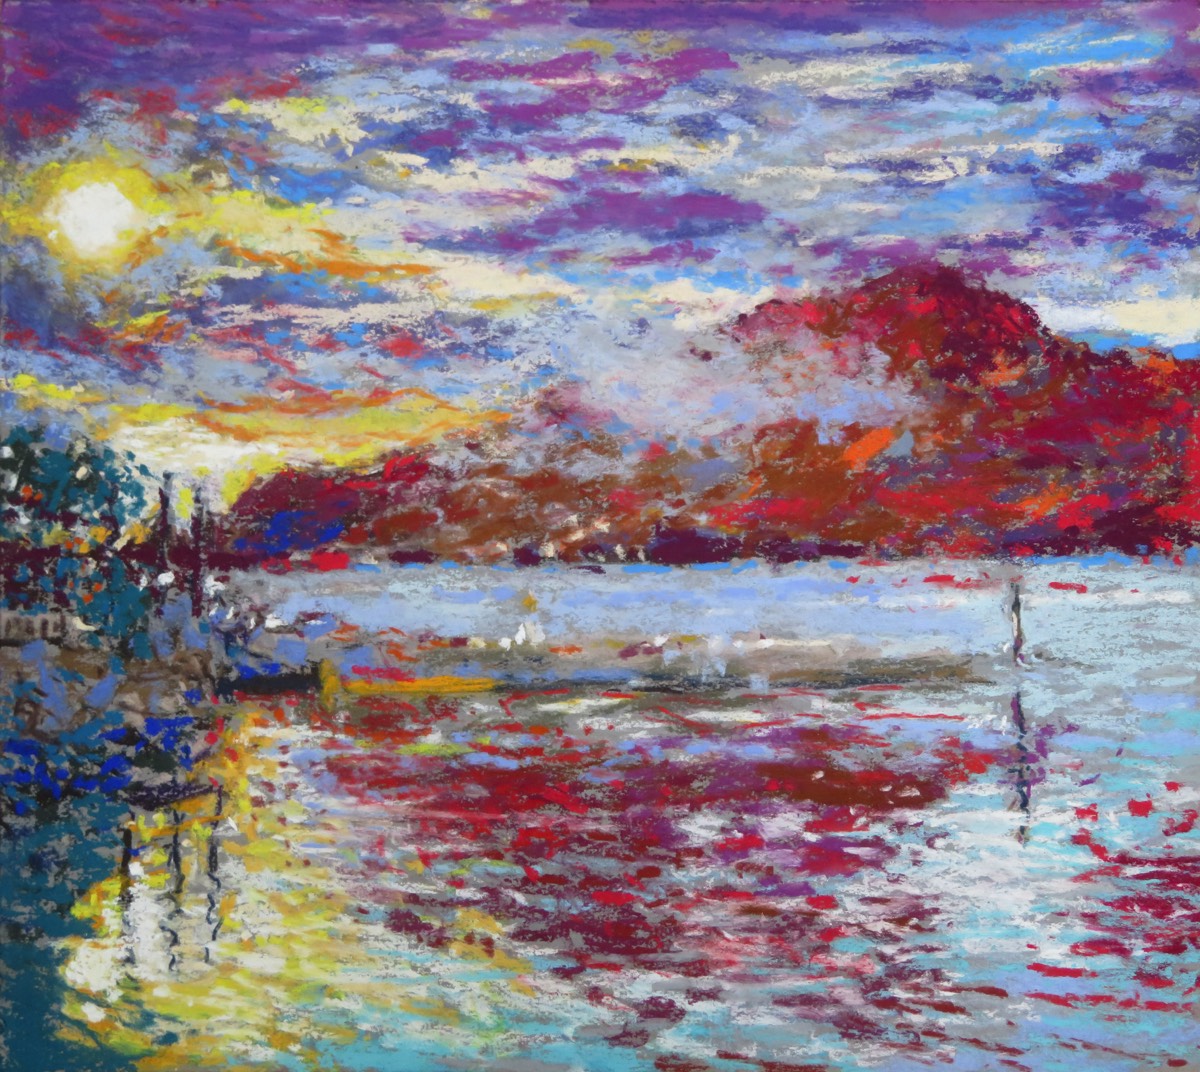 Glenelg sunset towards Skye - Pastel - 20 X 17.25 inches - Lockdown series - available on request